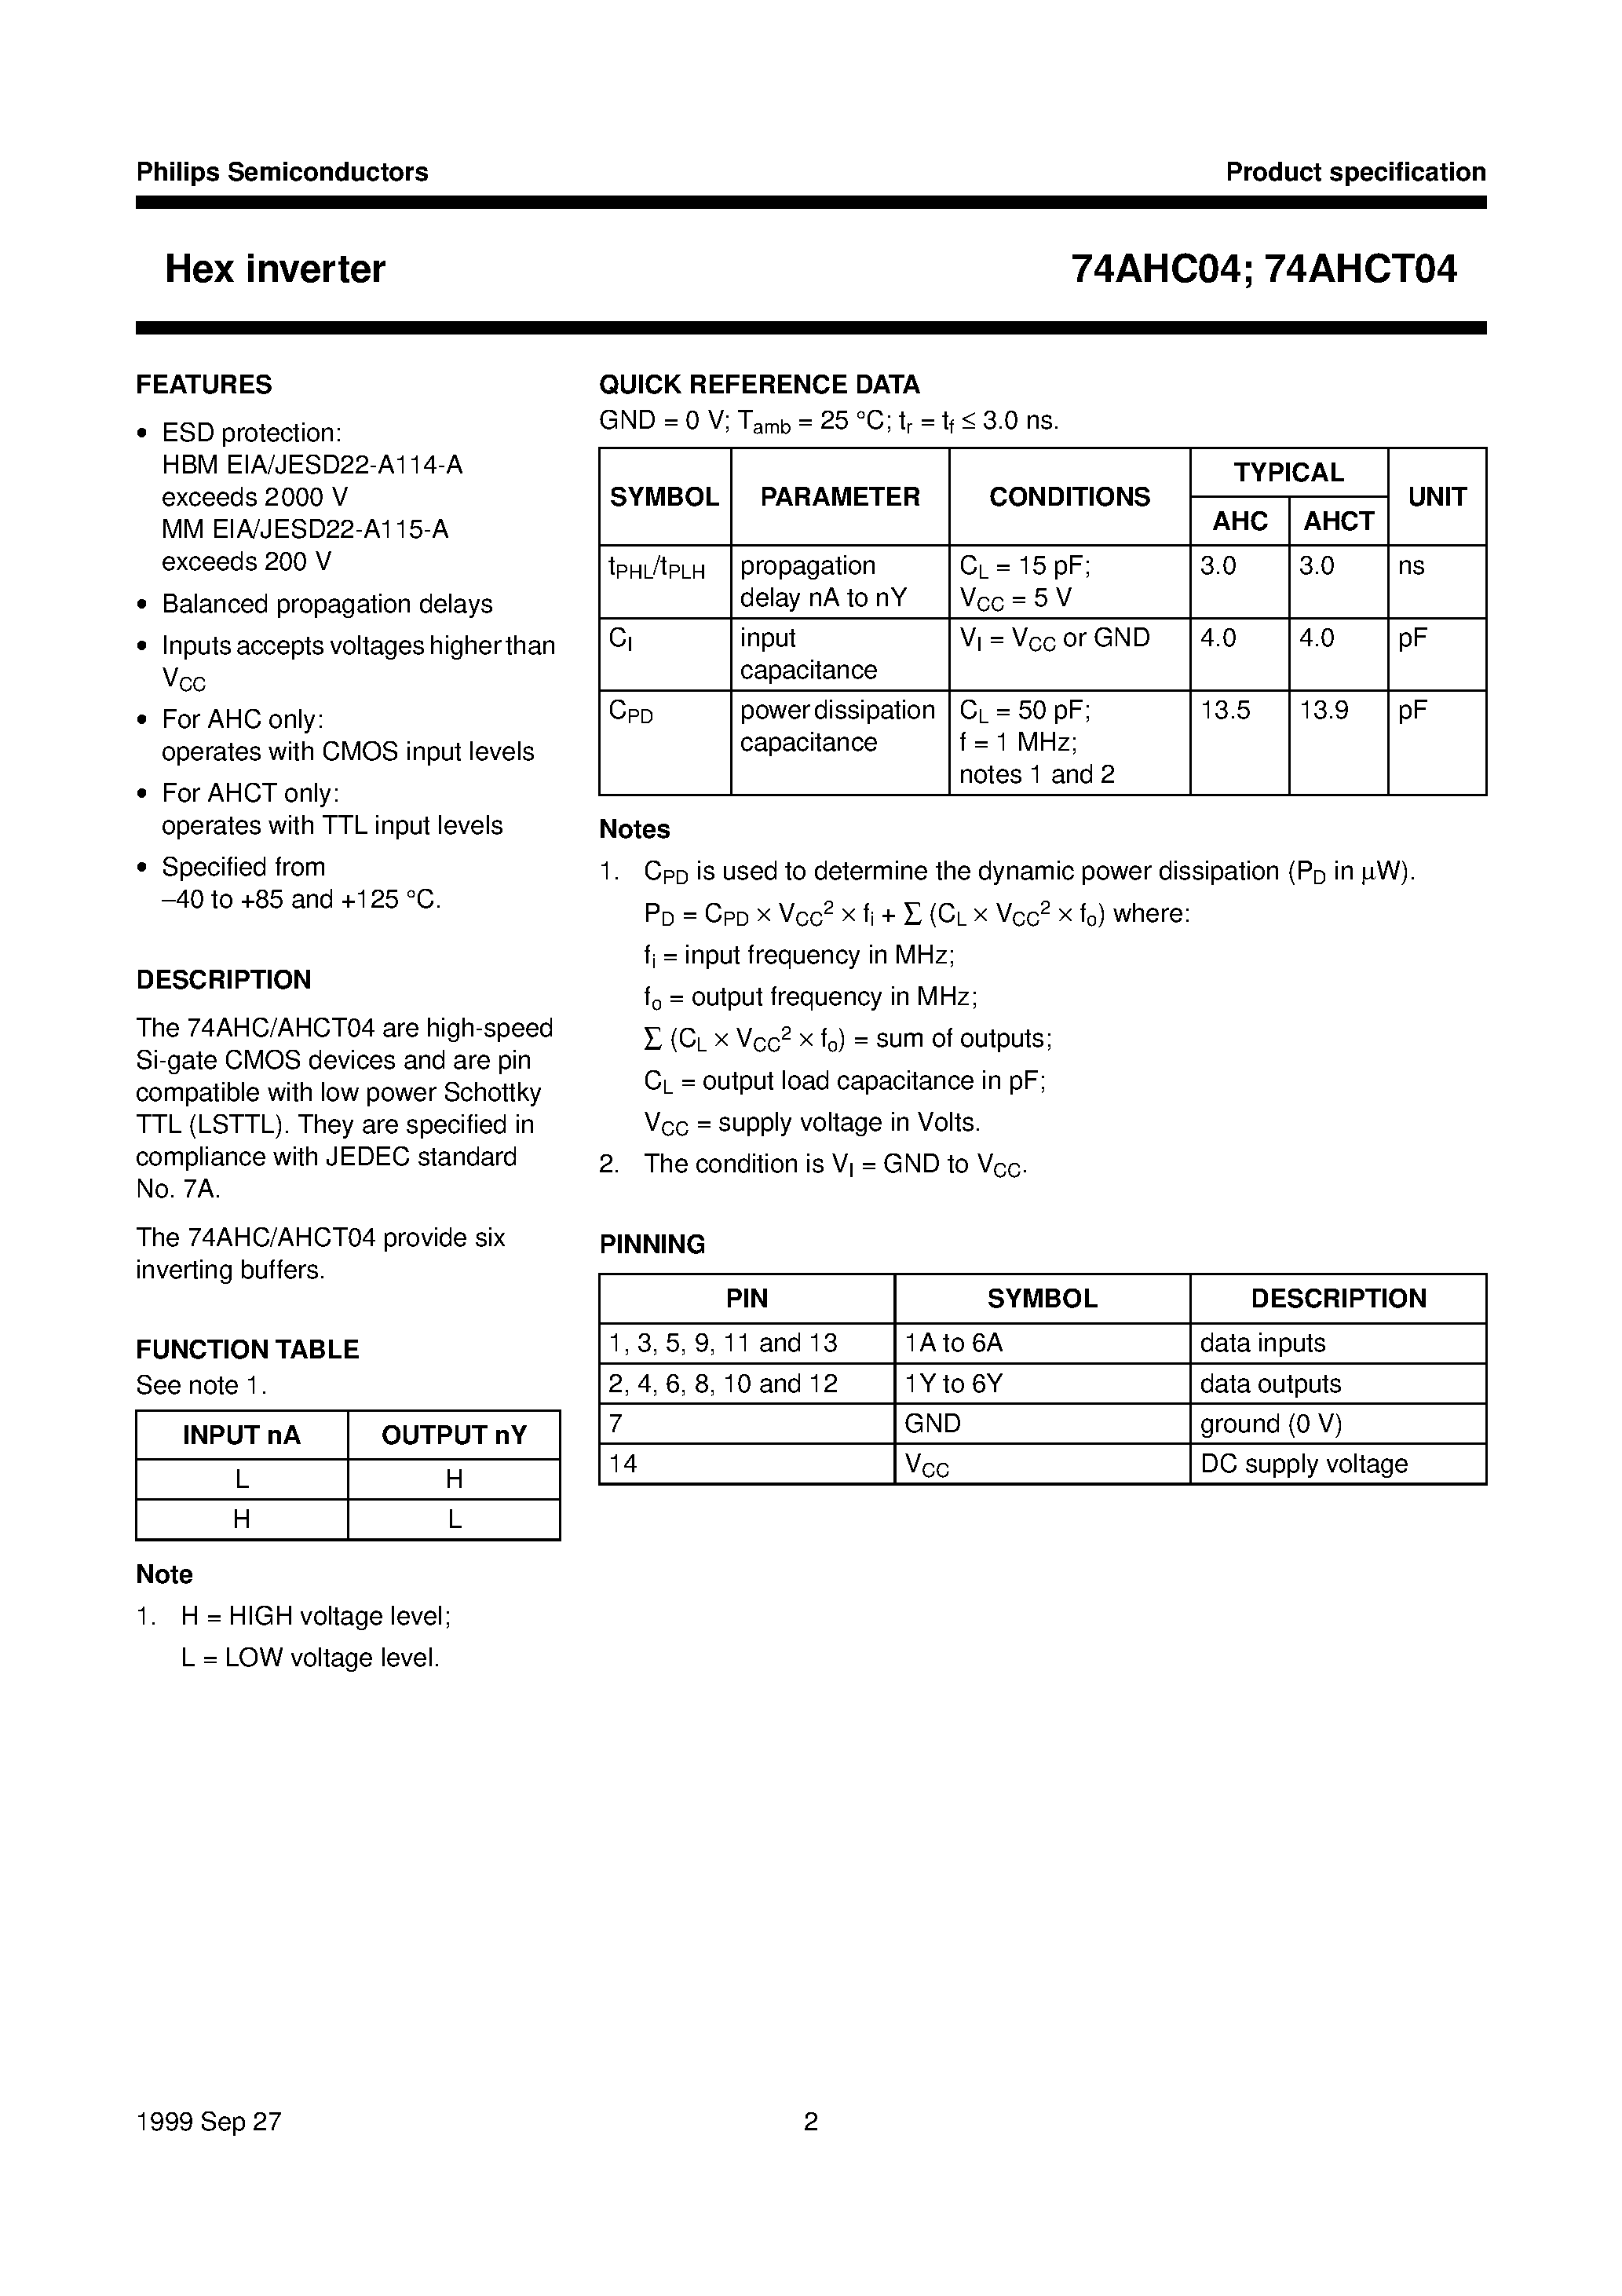 Datasheet 74AHC04D - Hex inverter page 2